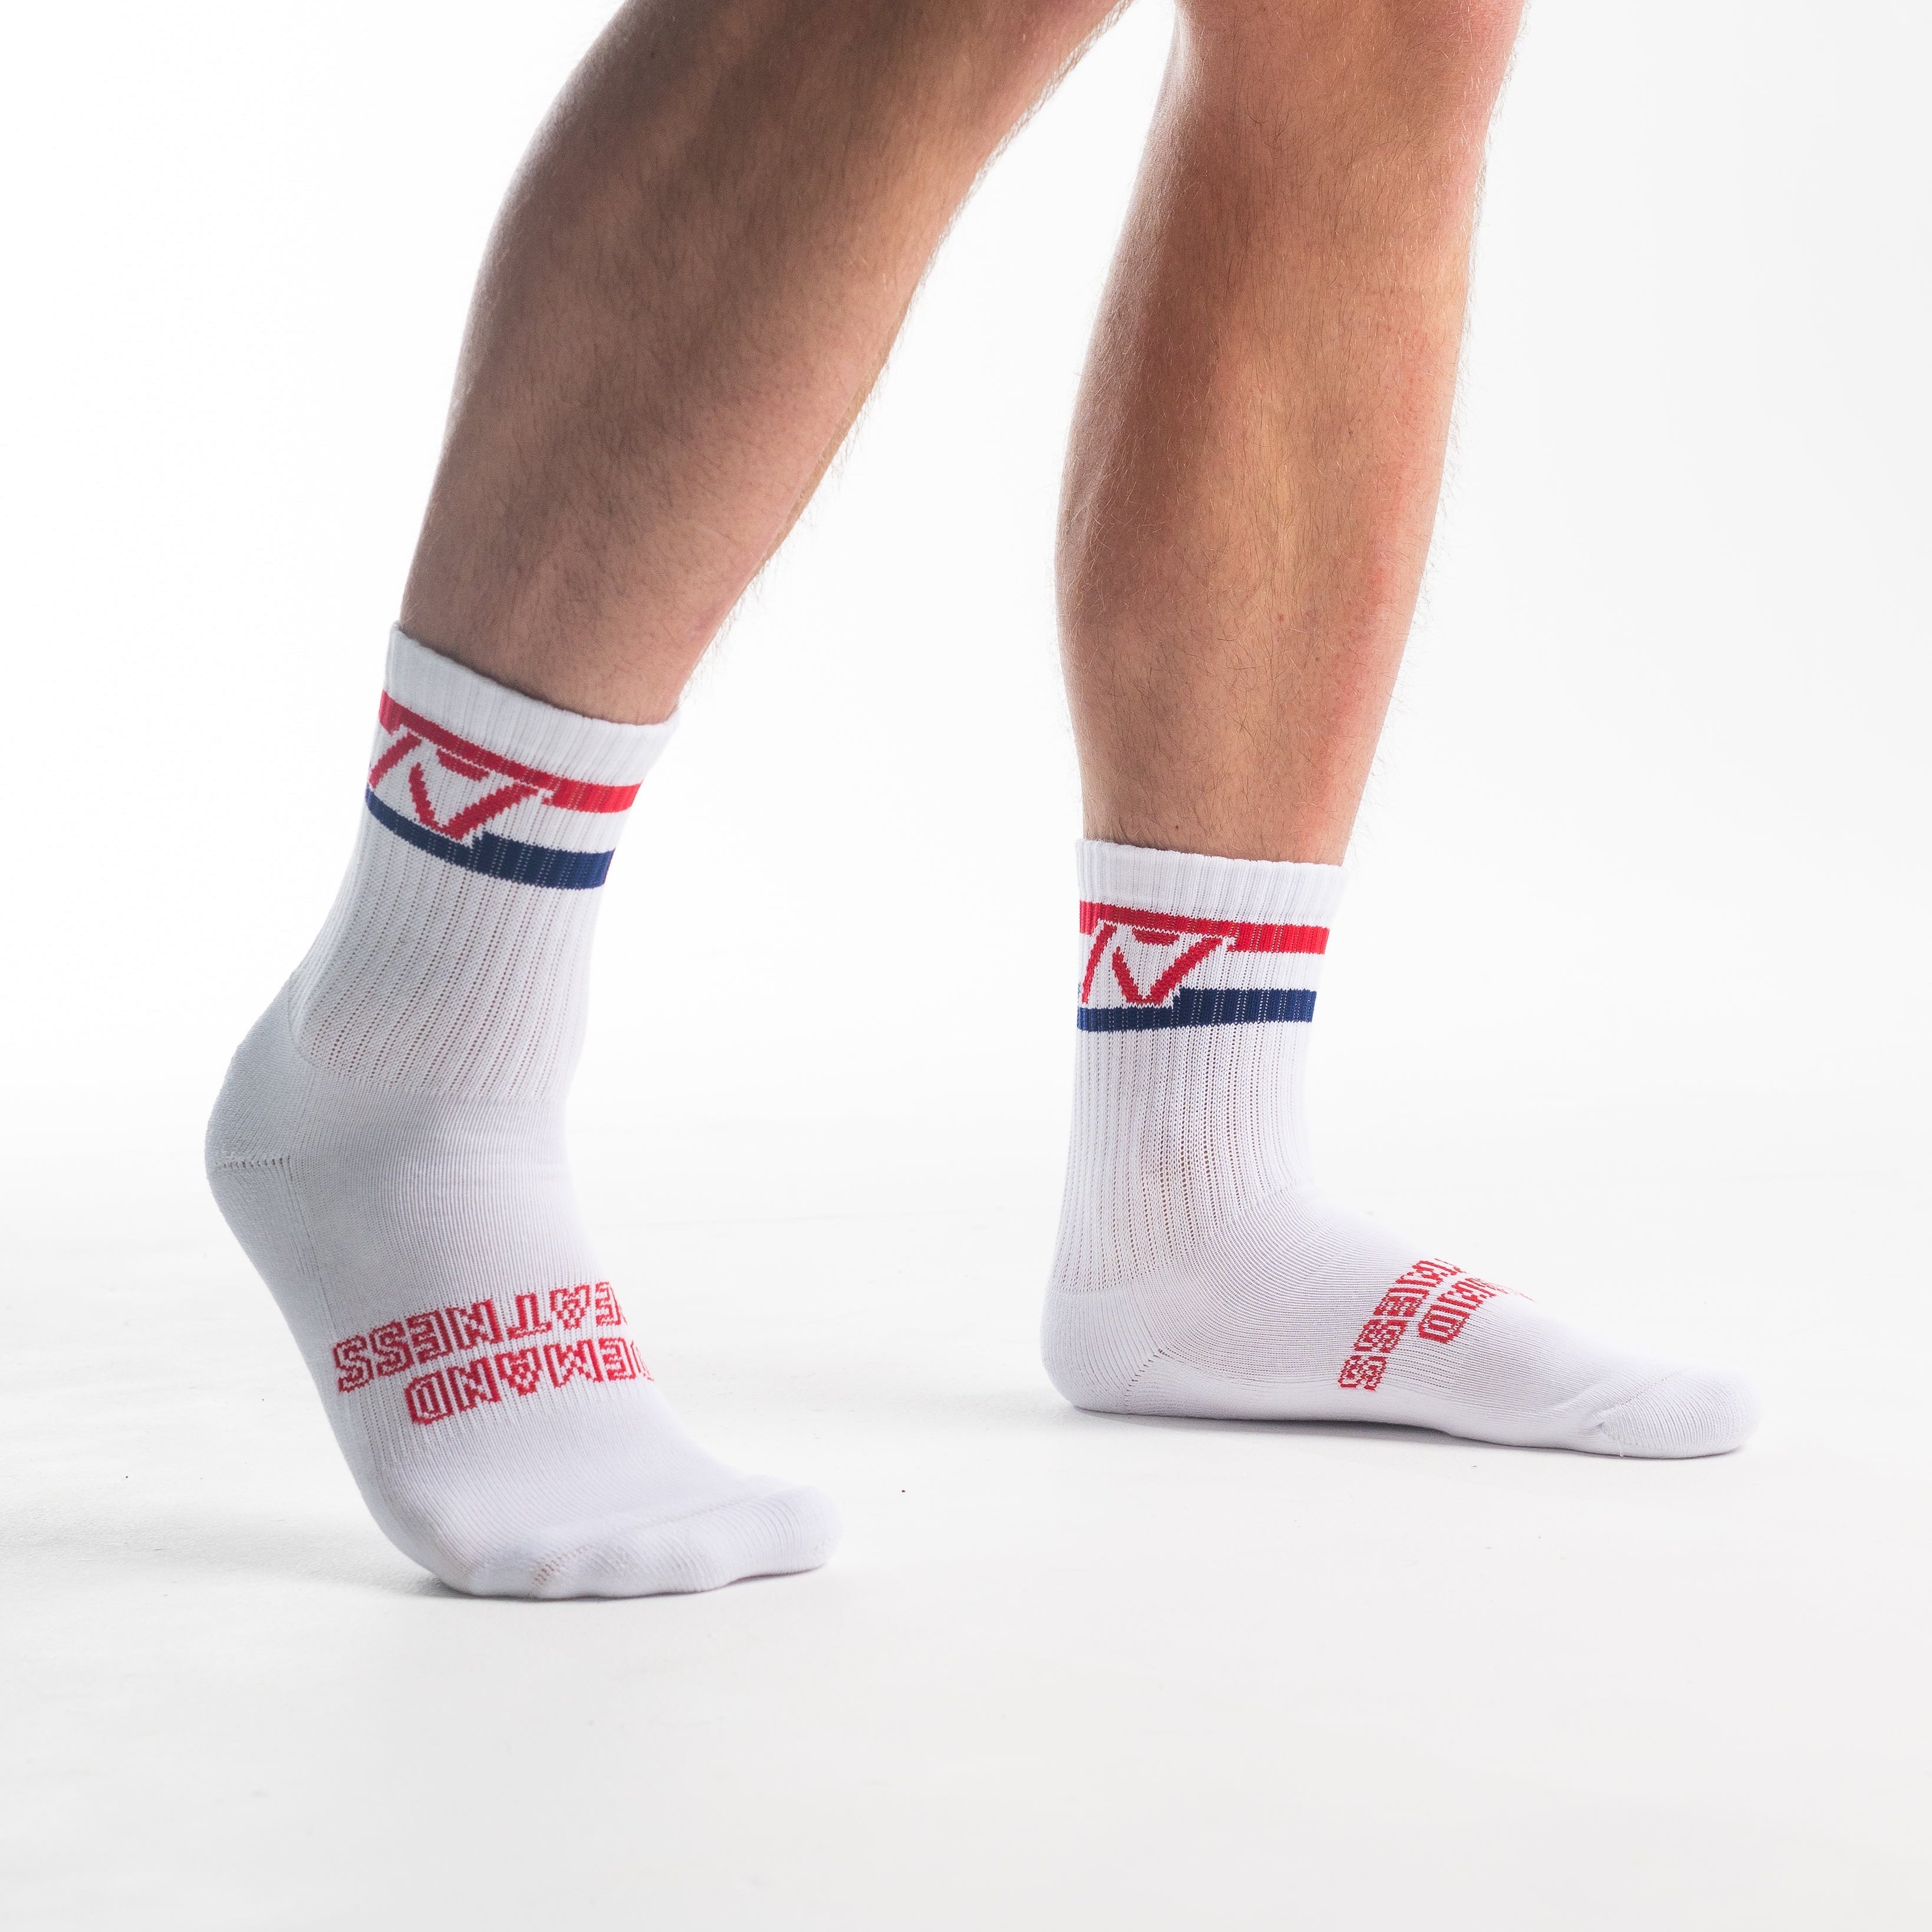 A7 RWB Crew socks showcase red, white and blue logos to let your energy show on the platform, in your training or while out and about. The IPF Approved Shadow Stone Meet Kit includes Powerlifting Singlet, A7 Meet Shirt, A7 Zebra Wrist Wraps, A7 Deadlift Socks, Hourglass Knee Sleeves (Stiff Knee Sleeves and Rigor Mortis Knee Sleeves). Genouillères powerlifting shipping to France, Spain, Ireland, Germany, Italy, Sweden and EU.